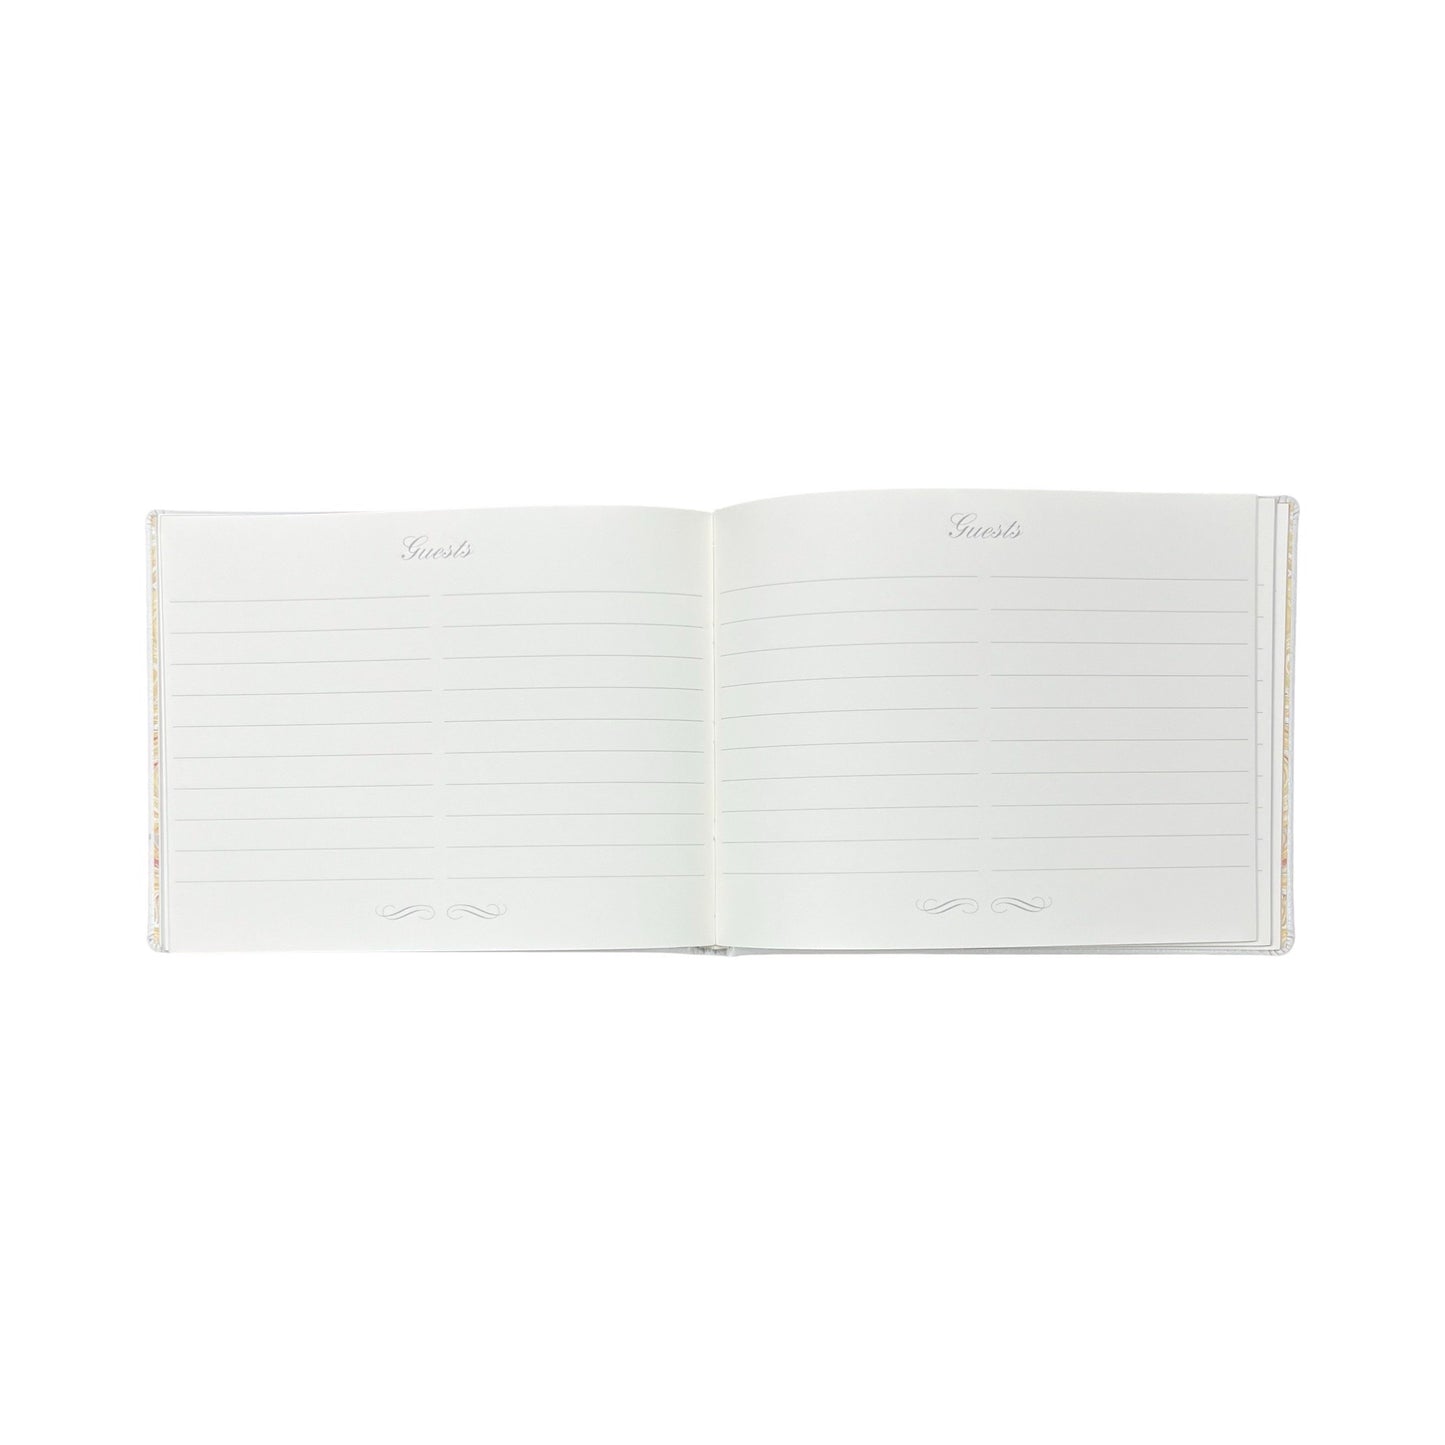 Classic White Leather Wedding Guest Book | 7 by 9 Inches Horizontal | Buffalo Embossed Calf Leather | GUESTS